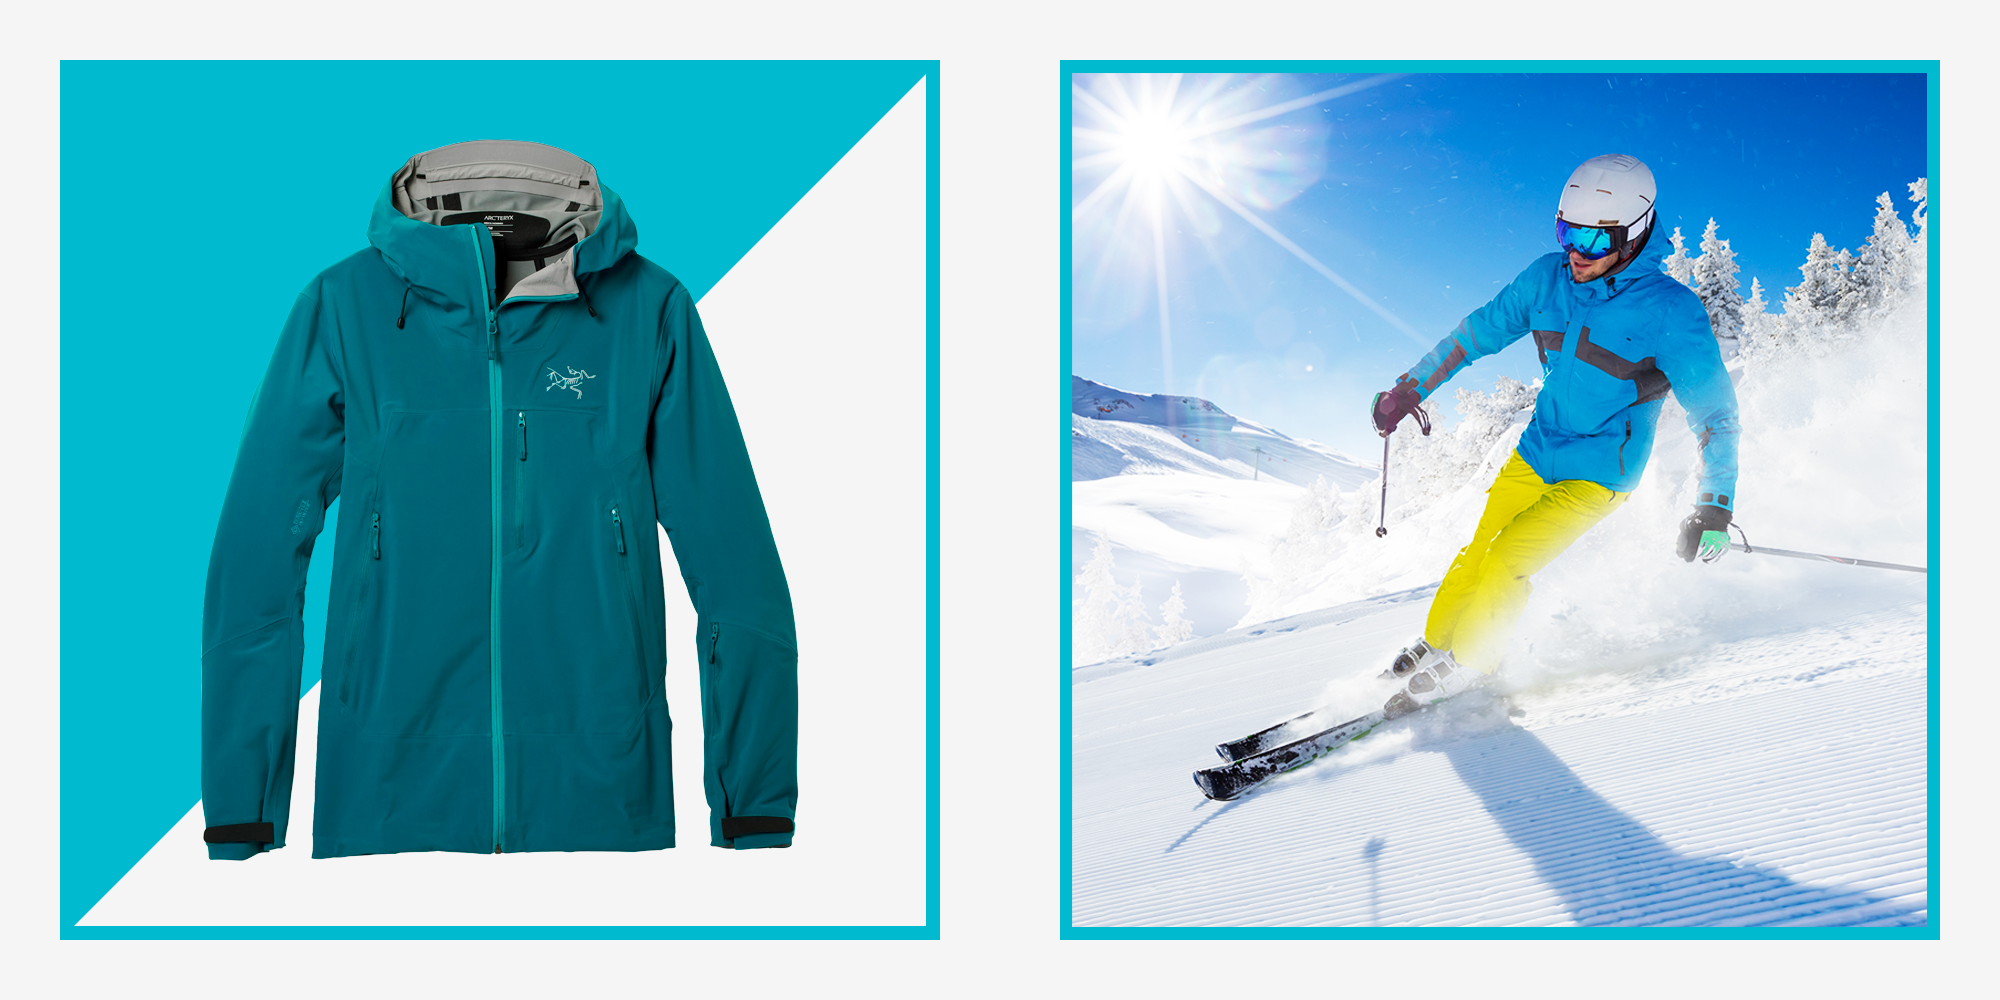 The Ski Brands and Gear Men: Jackets, Goggles